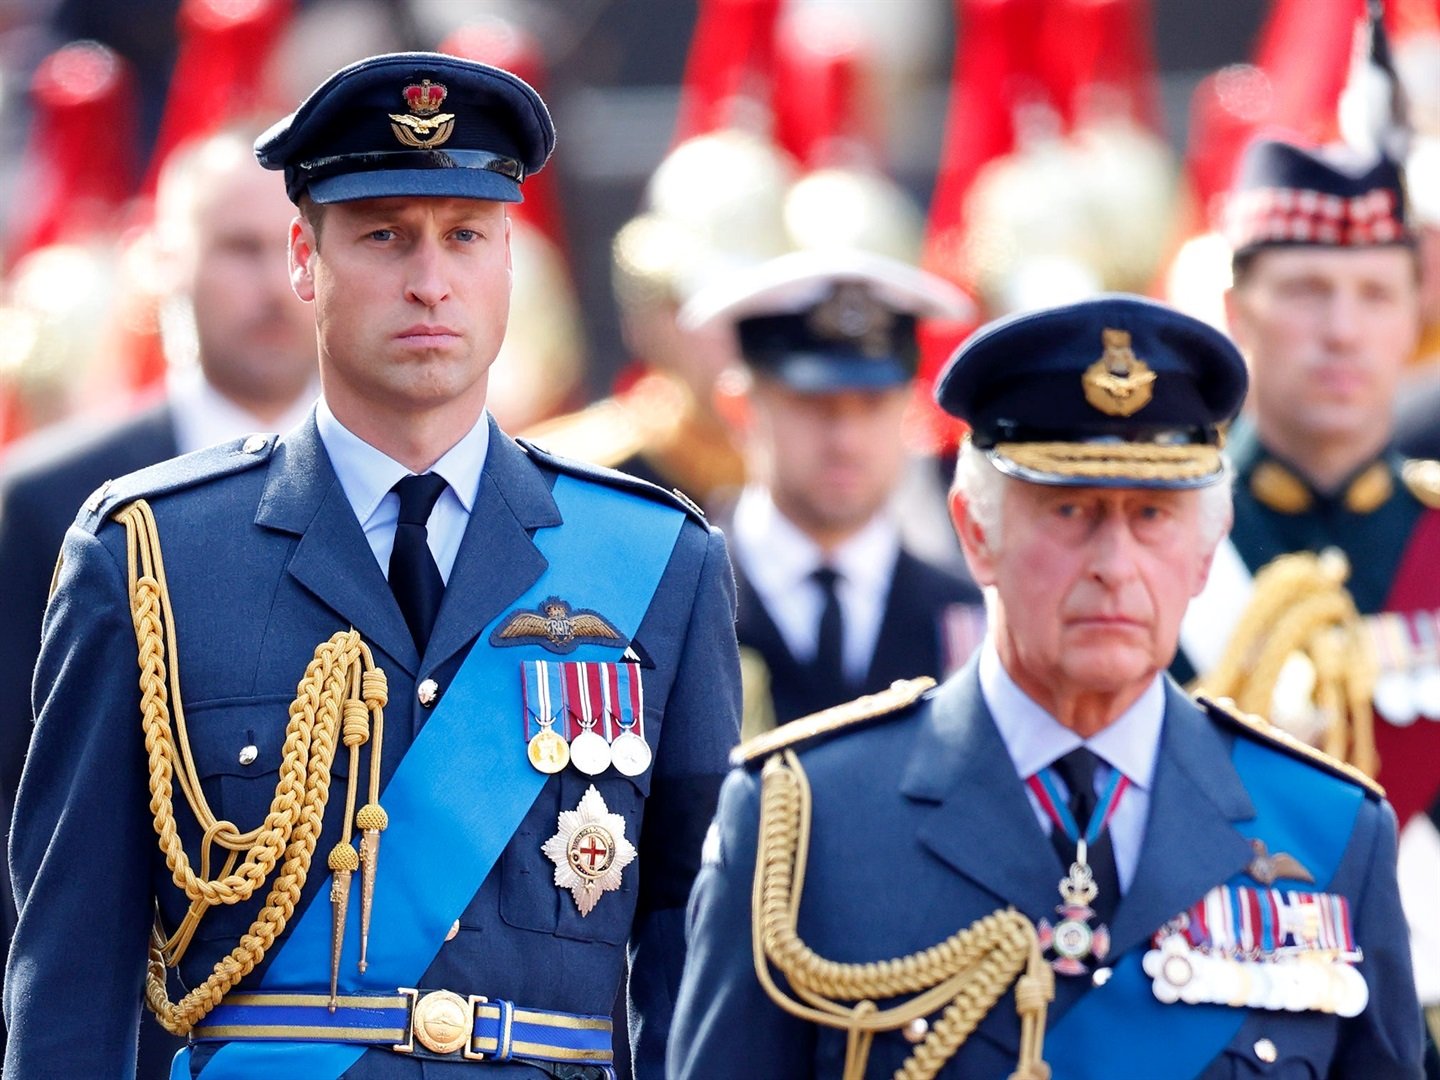 Here's what would happen if King Charles III stepped down and handed